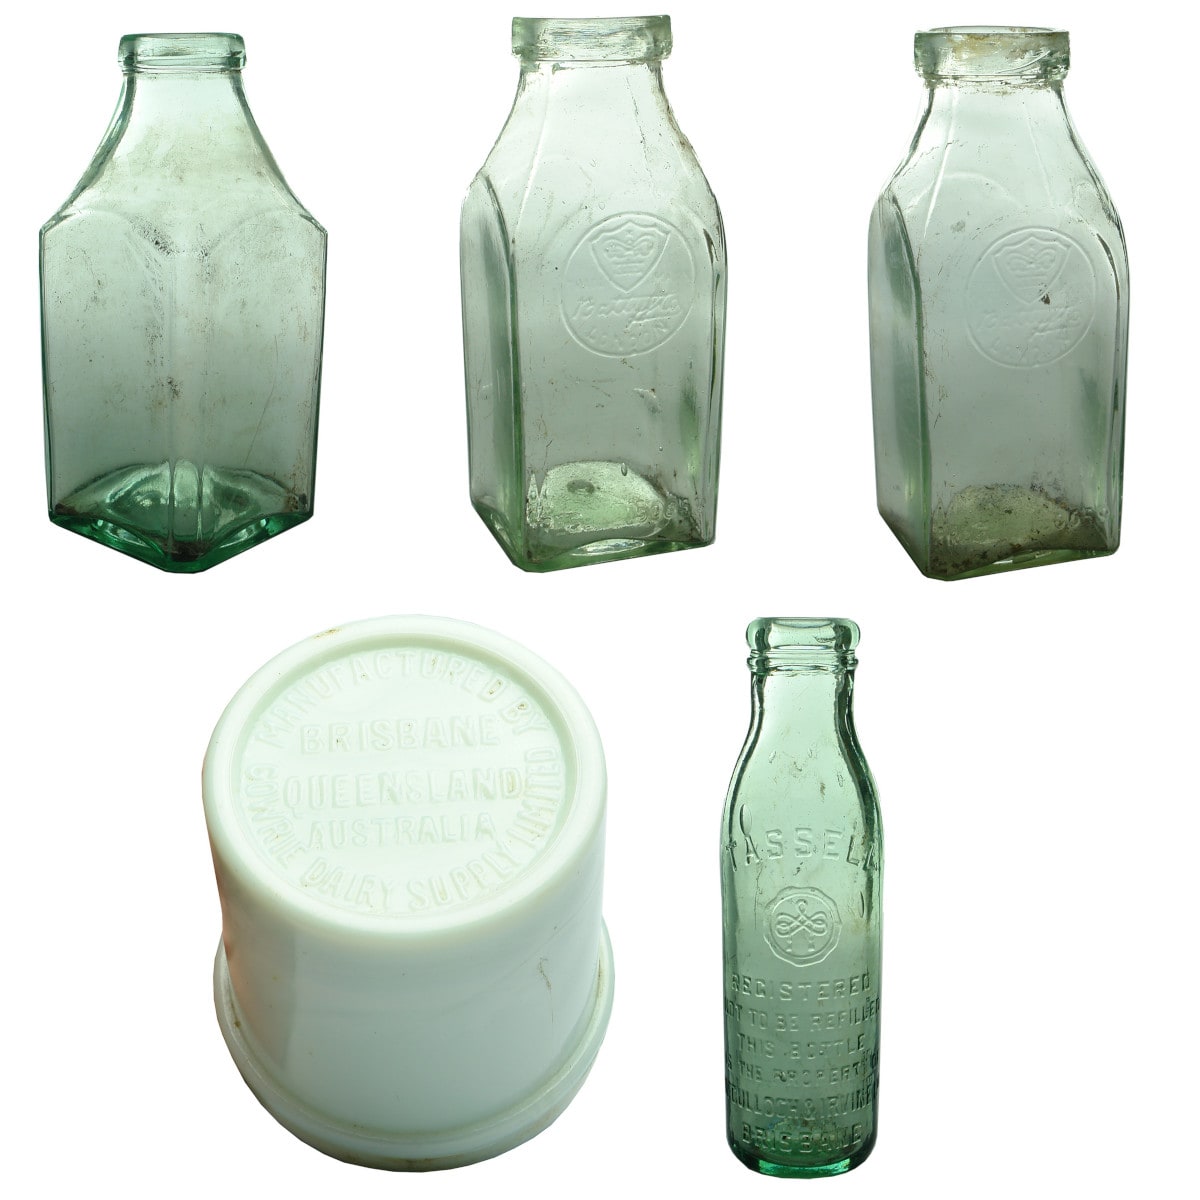 5 Household bottles: Extra large plain Square; 2 x Batty & Co., London, Crown; Gowrie Cheese Jar with Lid; Tassell Brisbane Chutney.